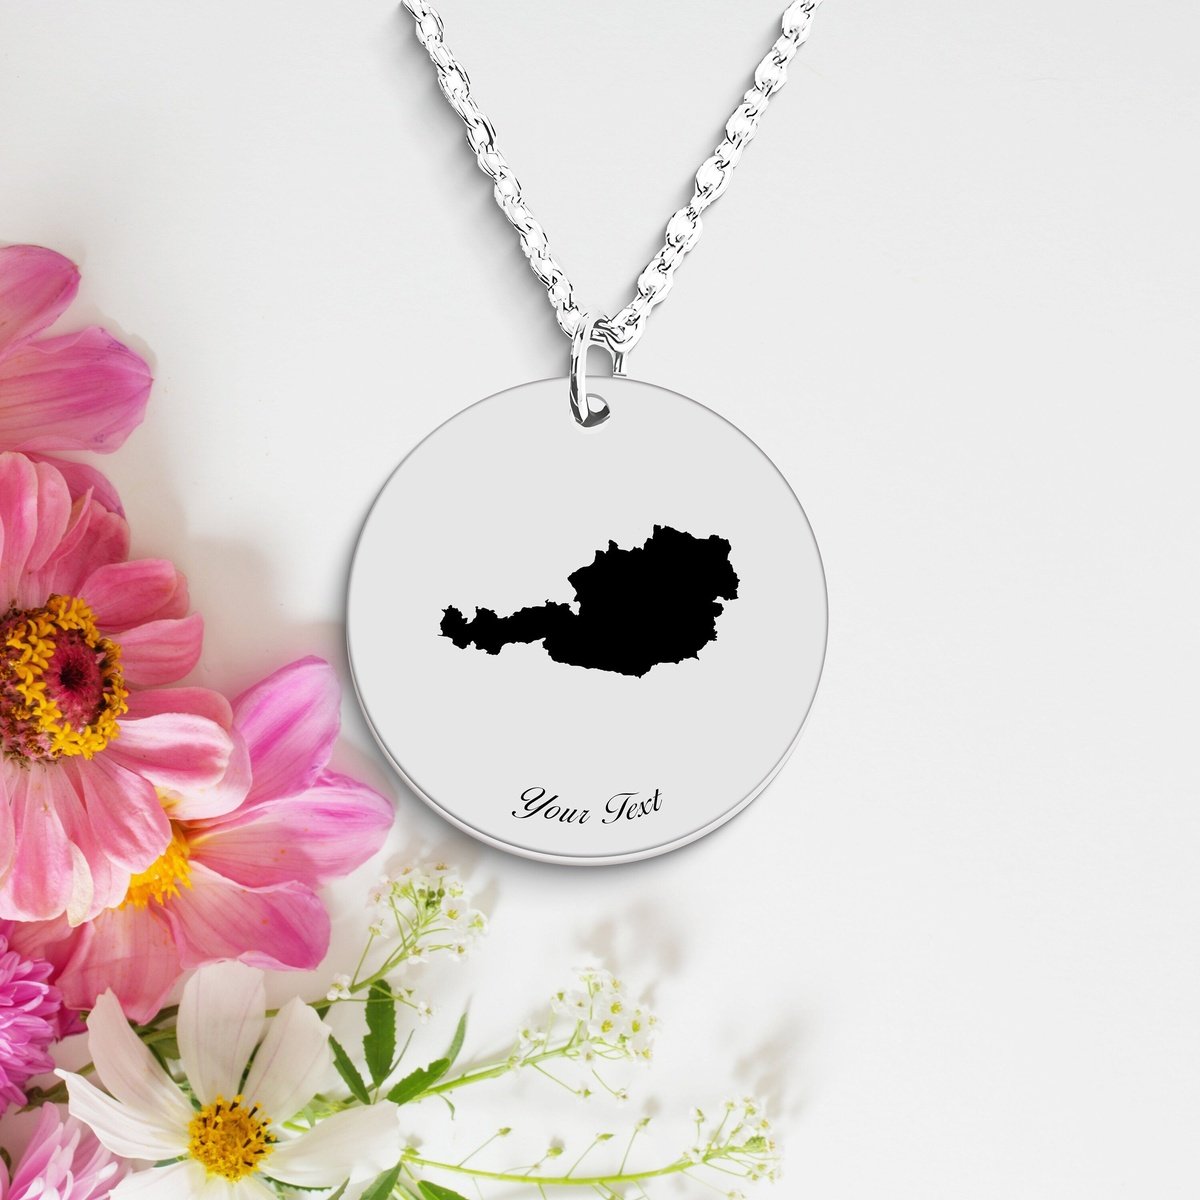 Austria Country Map Necklace, Your Name Necklace, Minimalist Necklace, Personalized Gift, Silver Necklace, Gift For Him Her